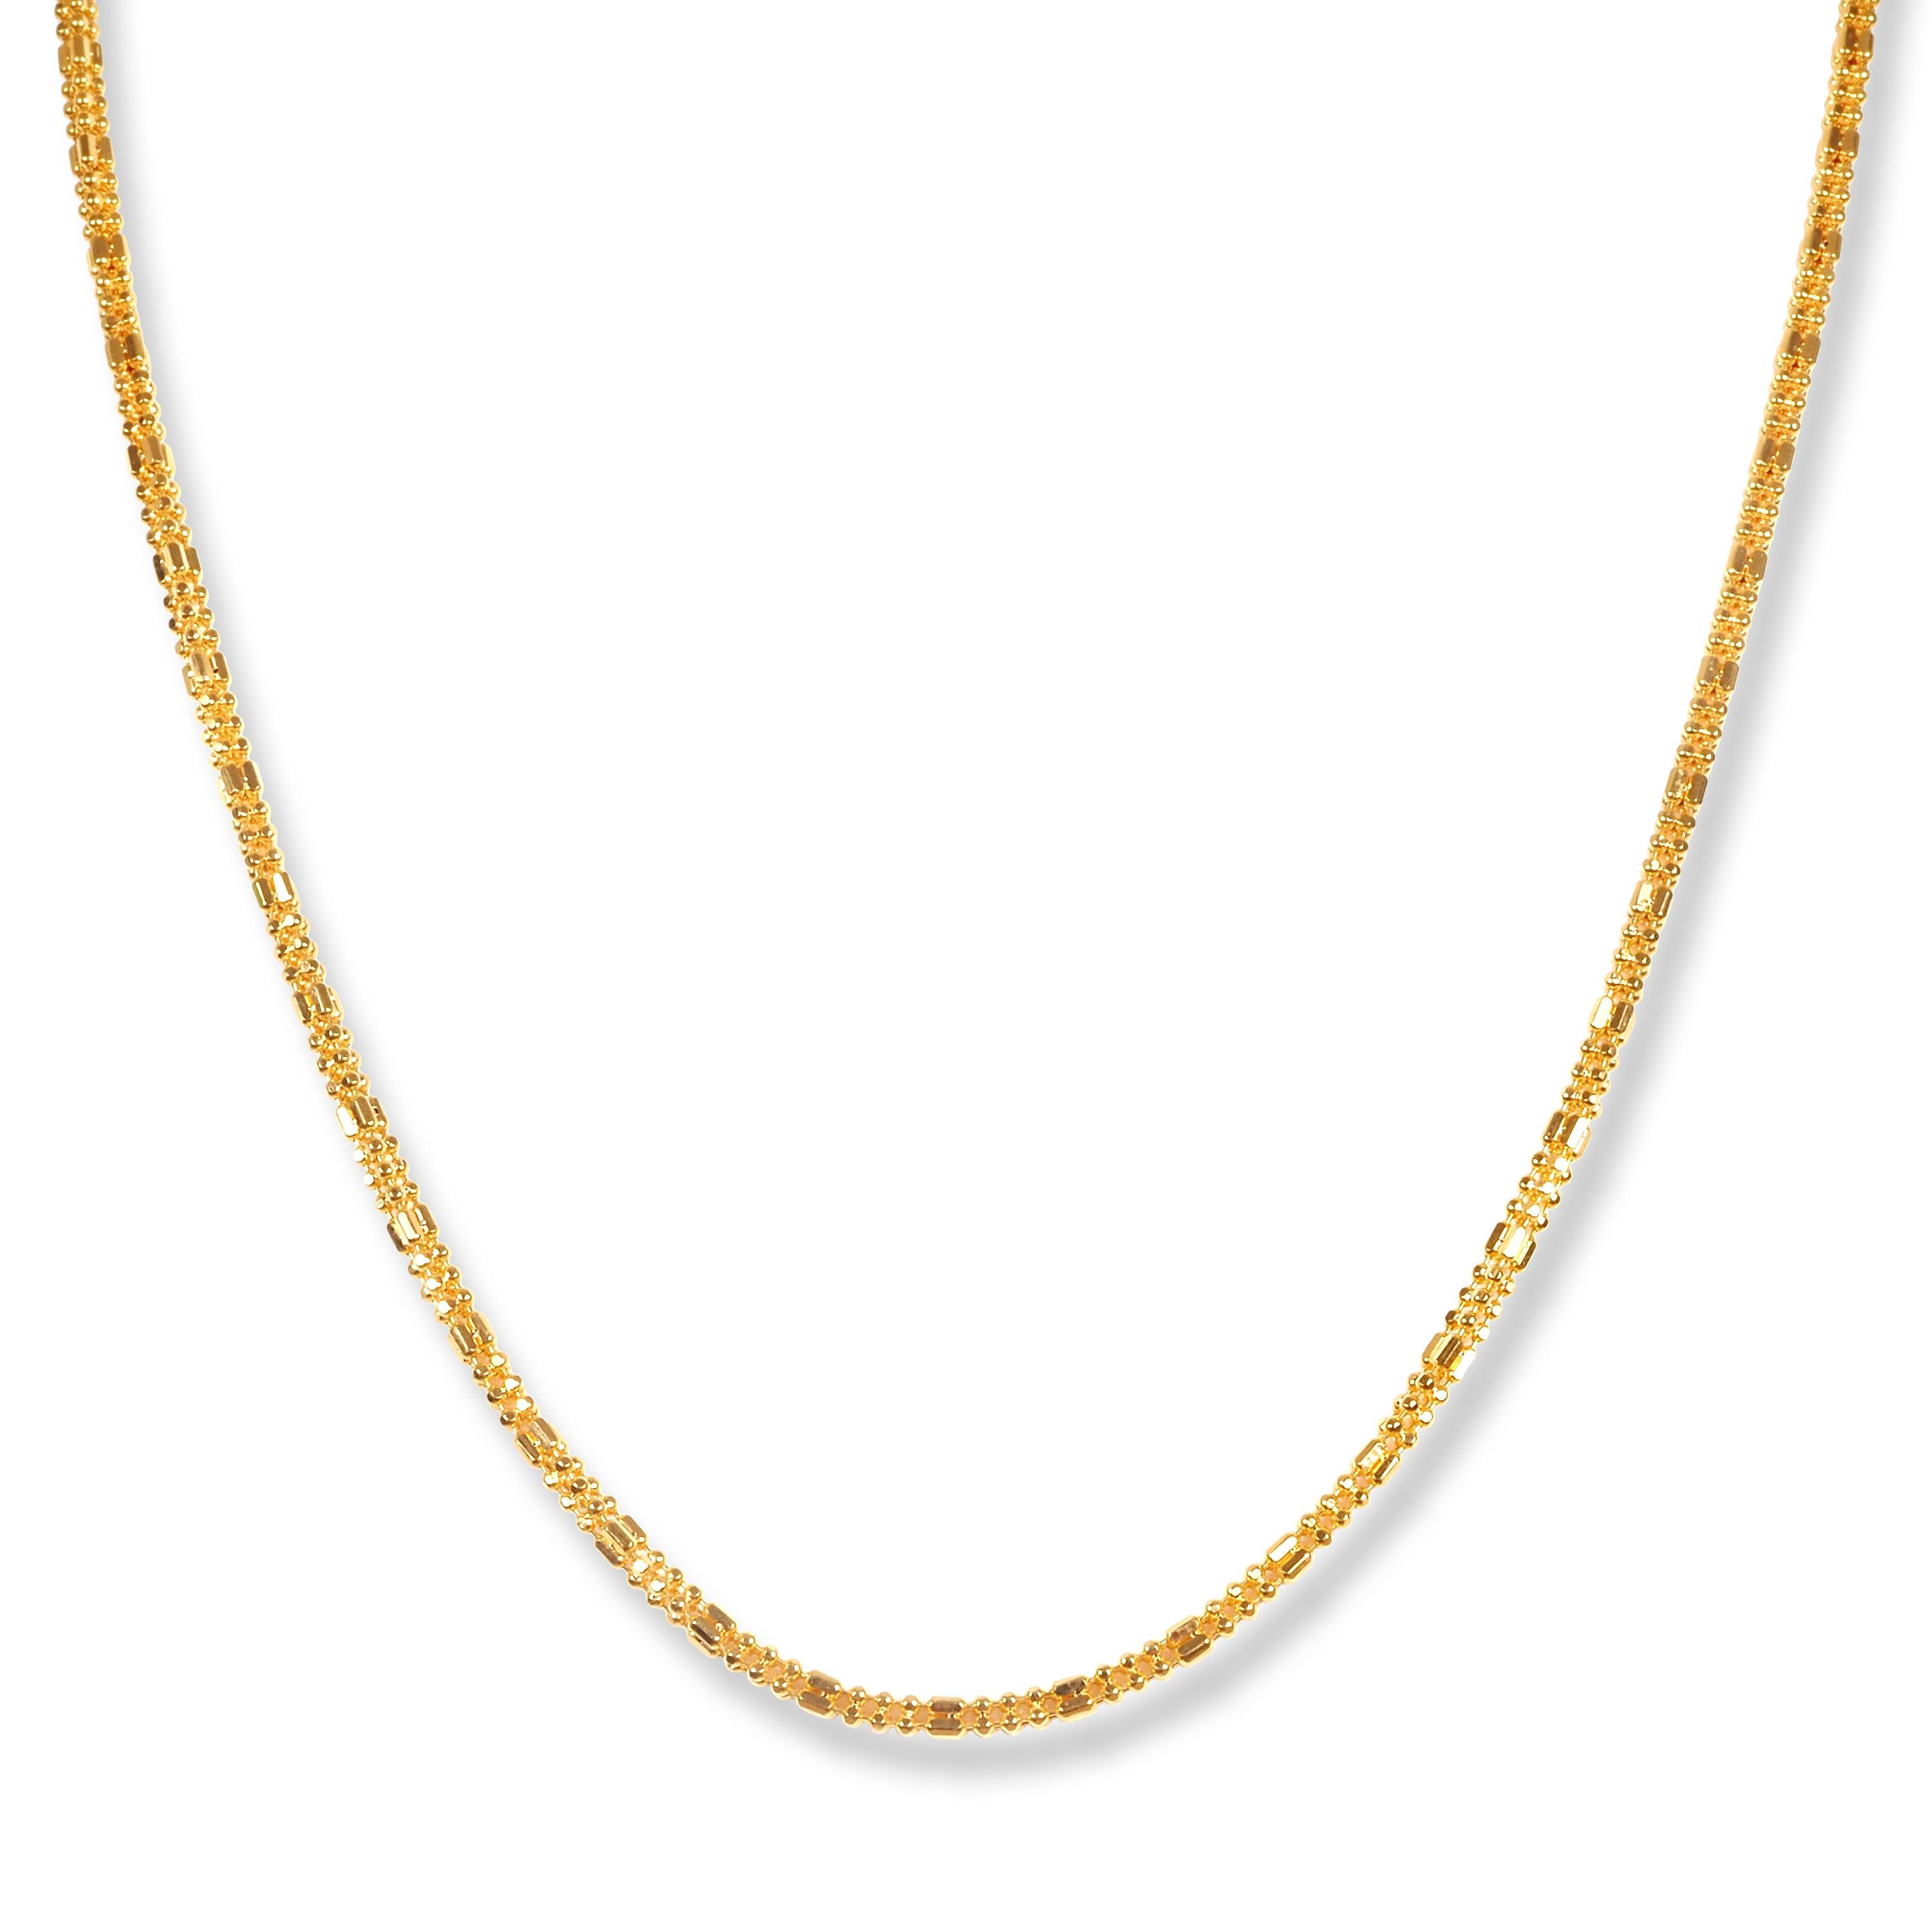 22ct Gold Beaded Interval Chain with S Clasp C-7143 - Minar Jewellers